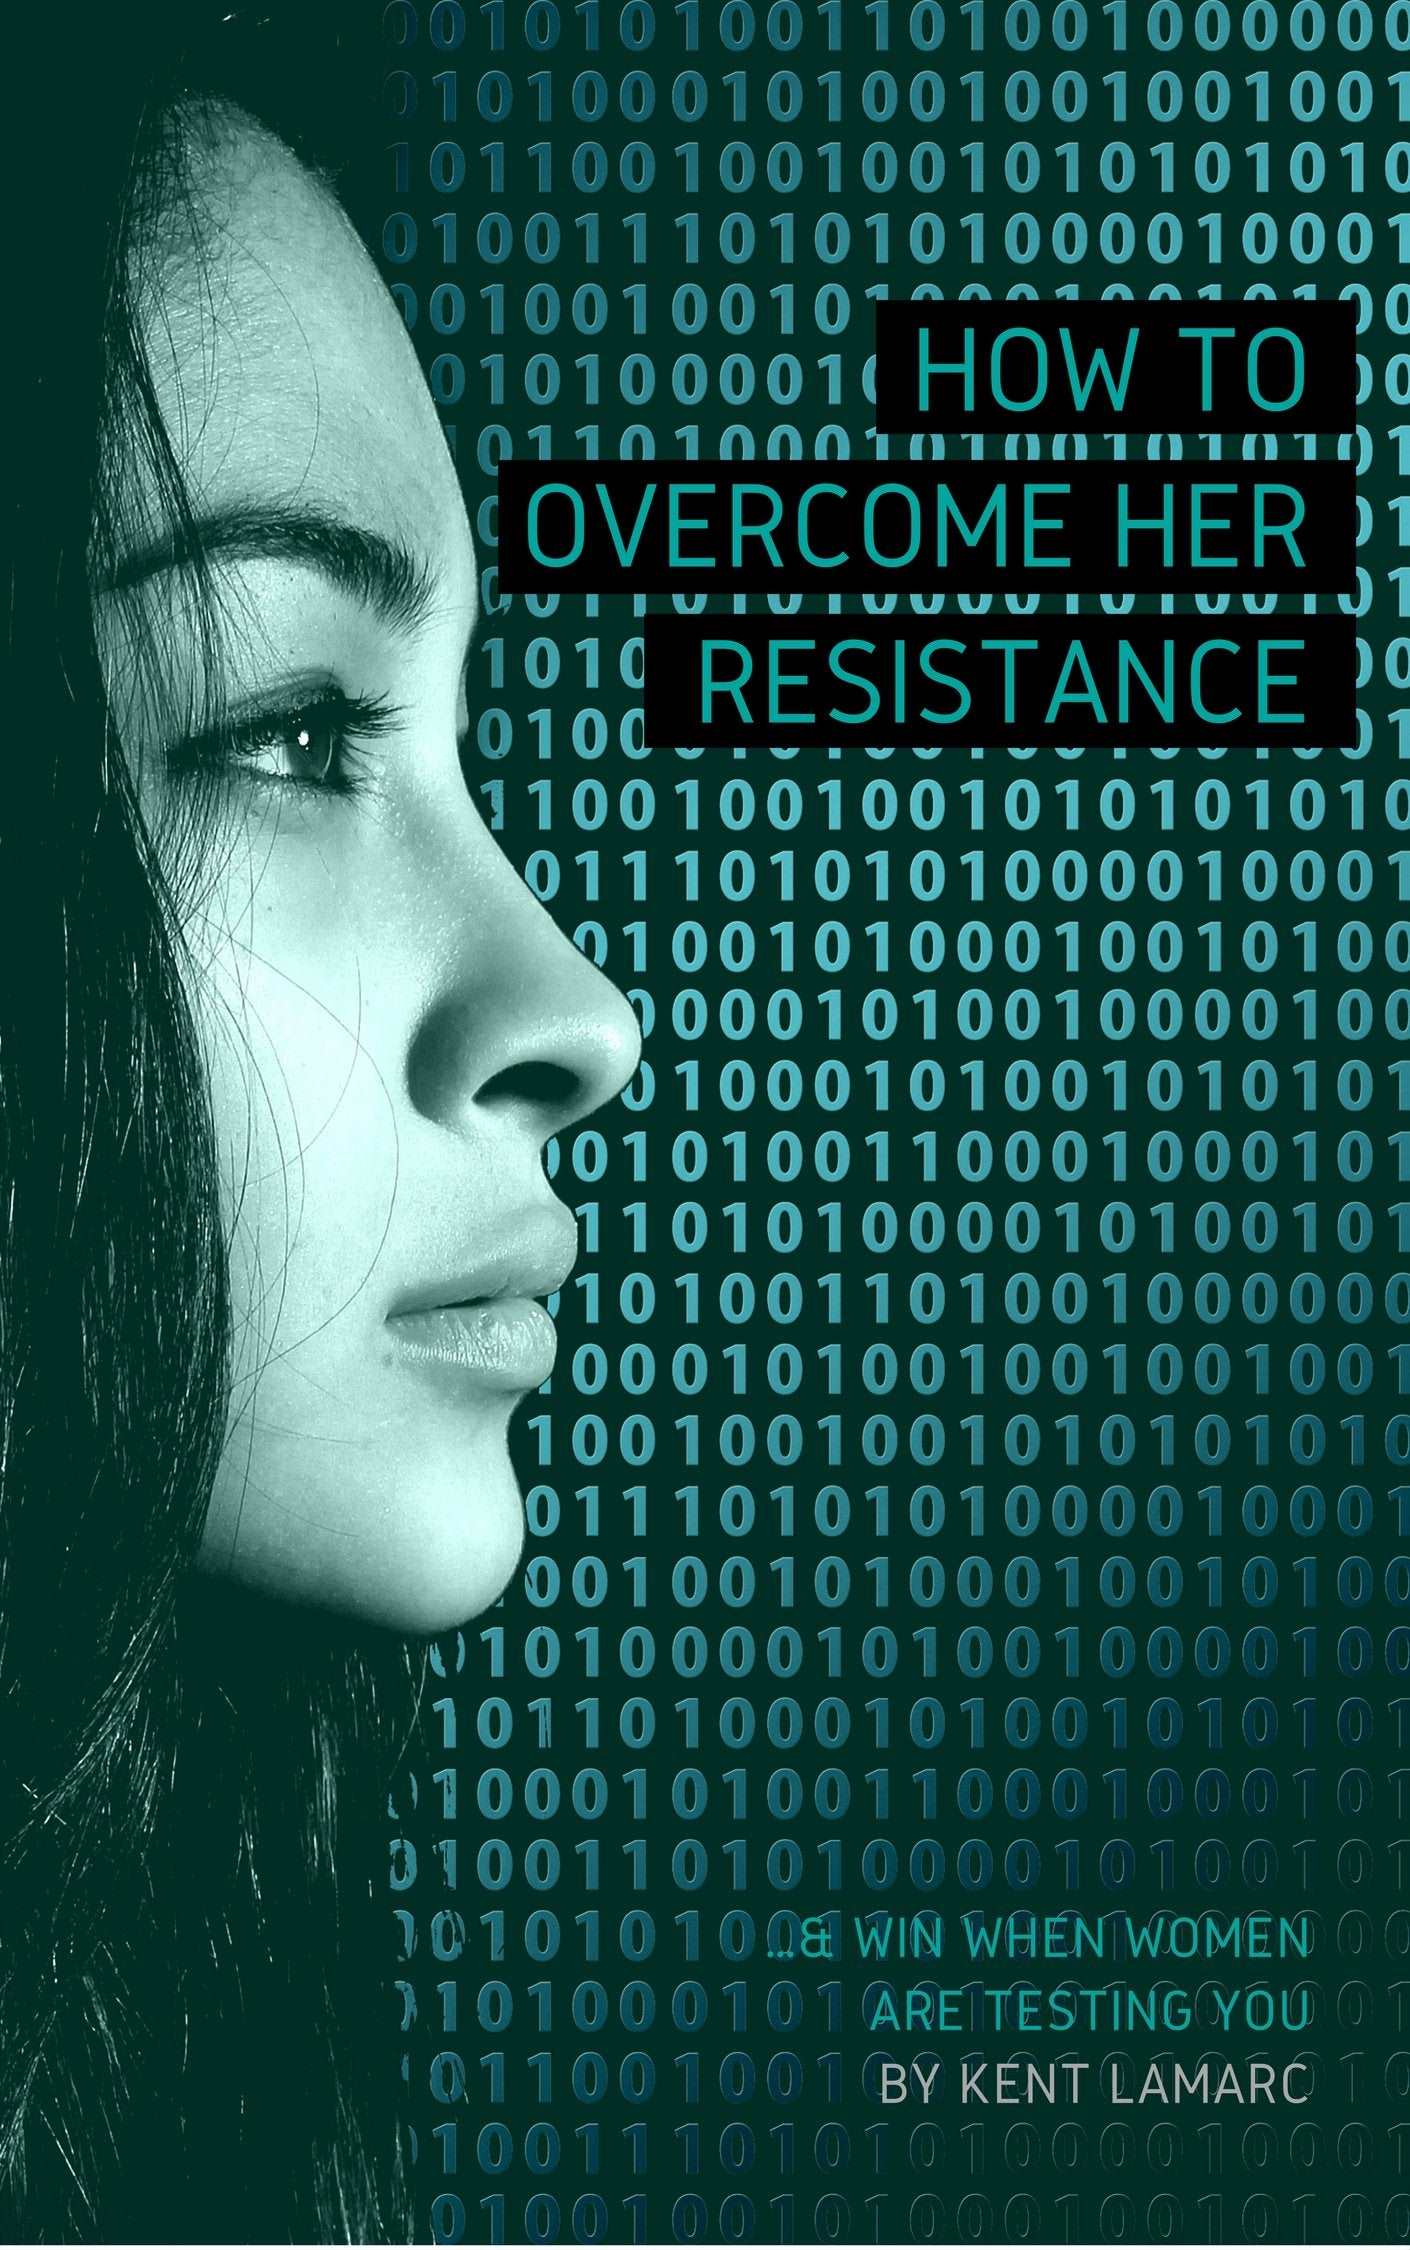 How to Overcome Her Resistance